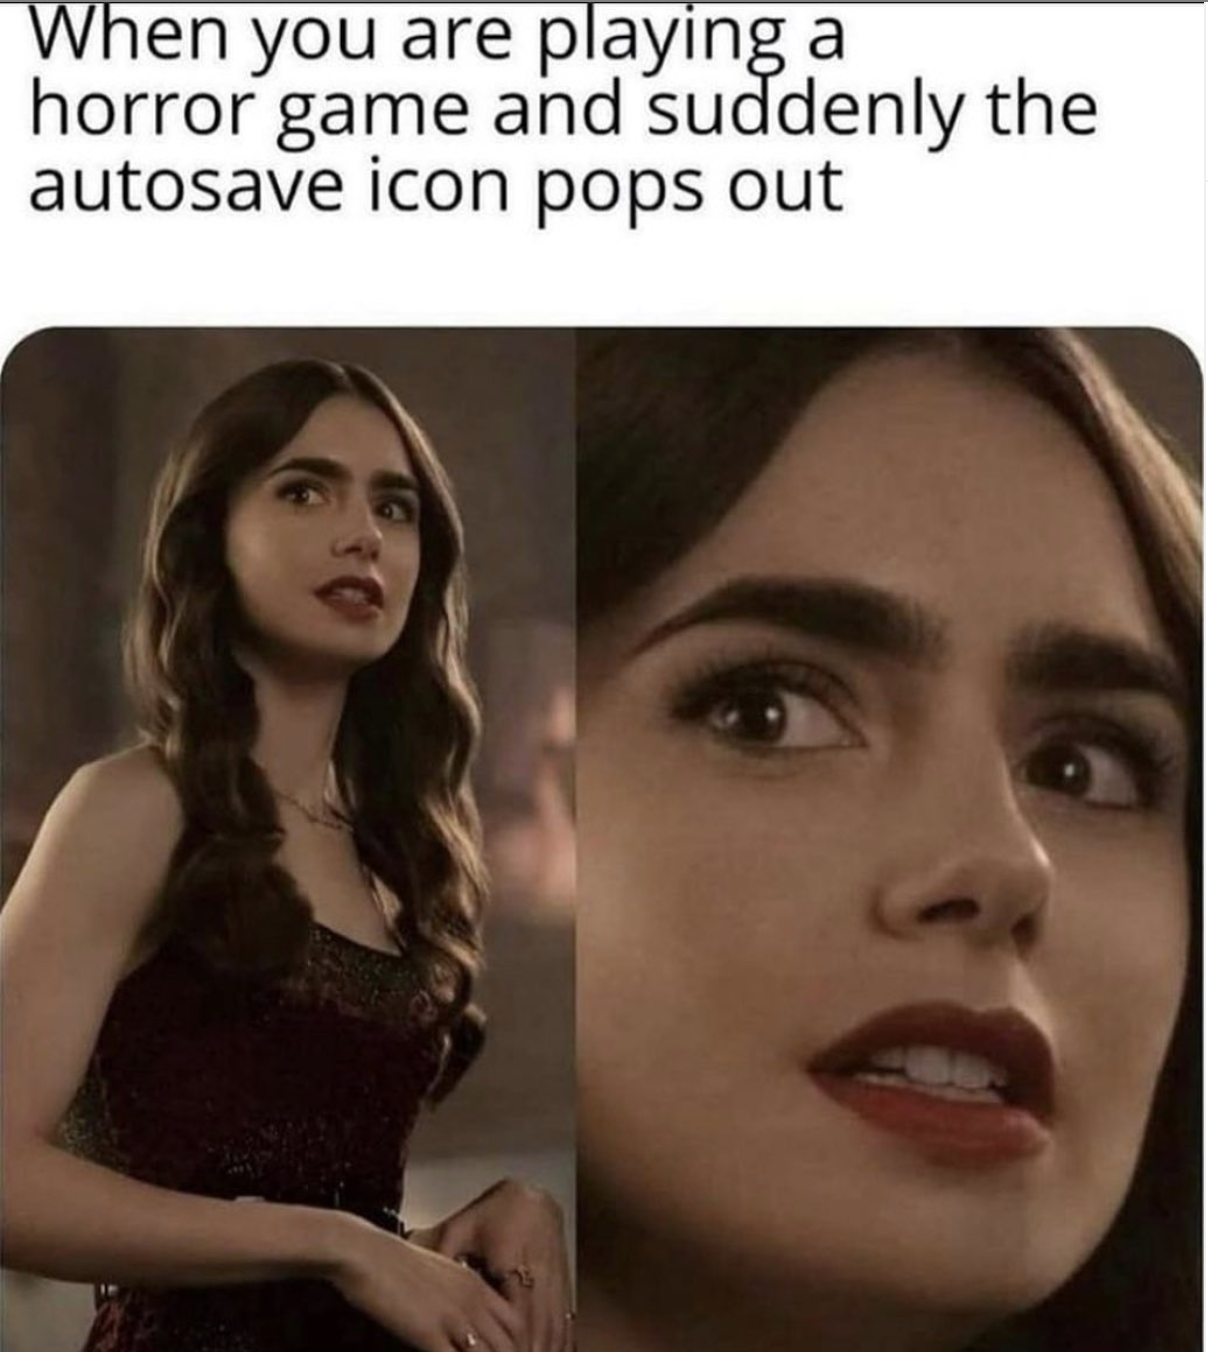 funny gaming memes - beauty - When you are playing a horror game and suddenly the autosave icon pops out